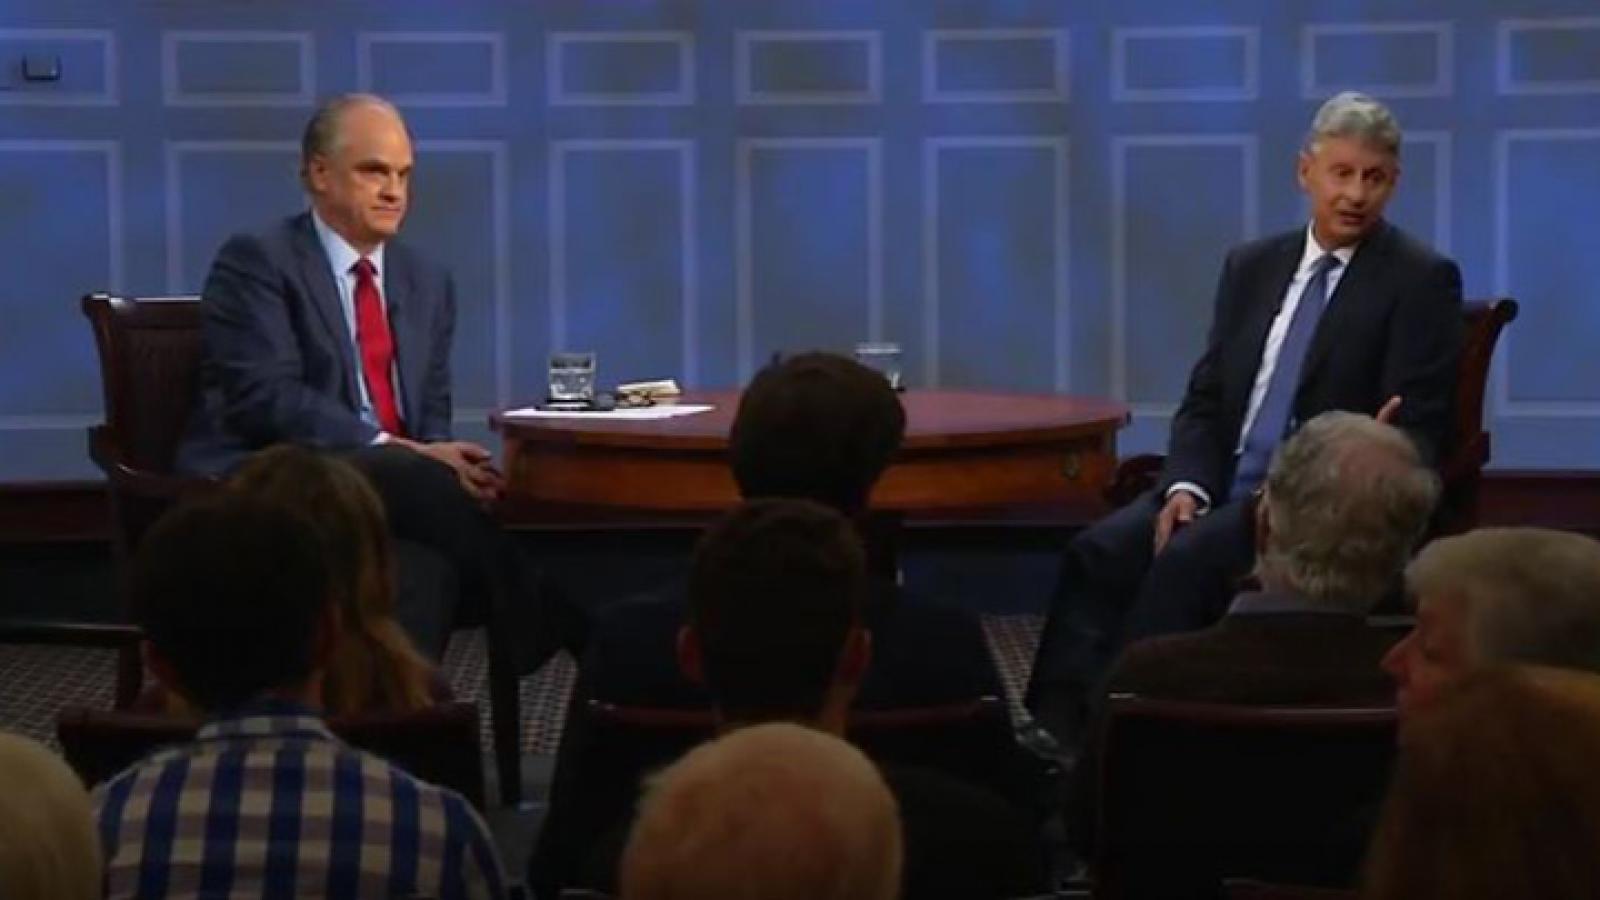 Air Force General Michael V. Hayden, who served at the very top of America’s most critical intelligence gathering organizations, takes questions from the American Forum studio audience